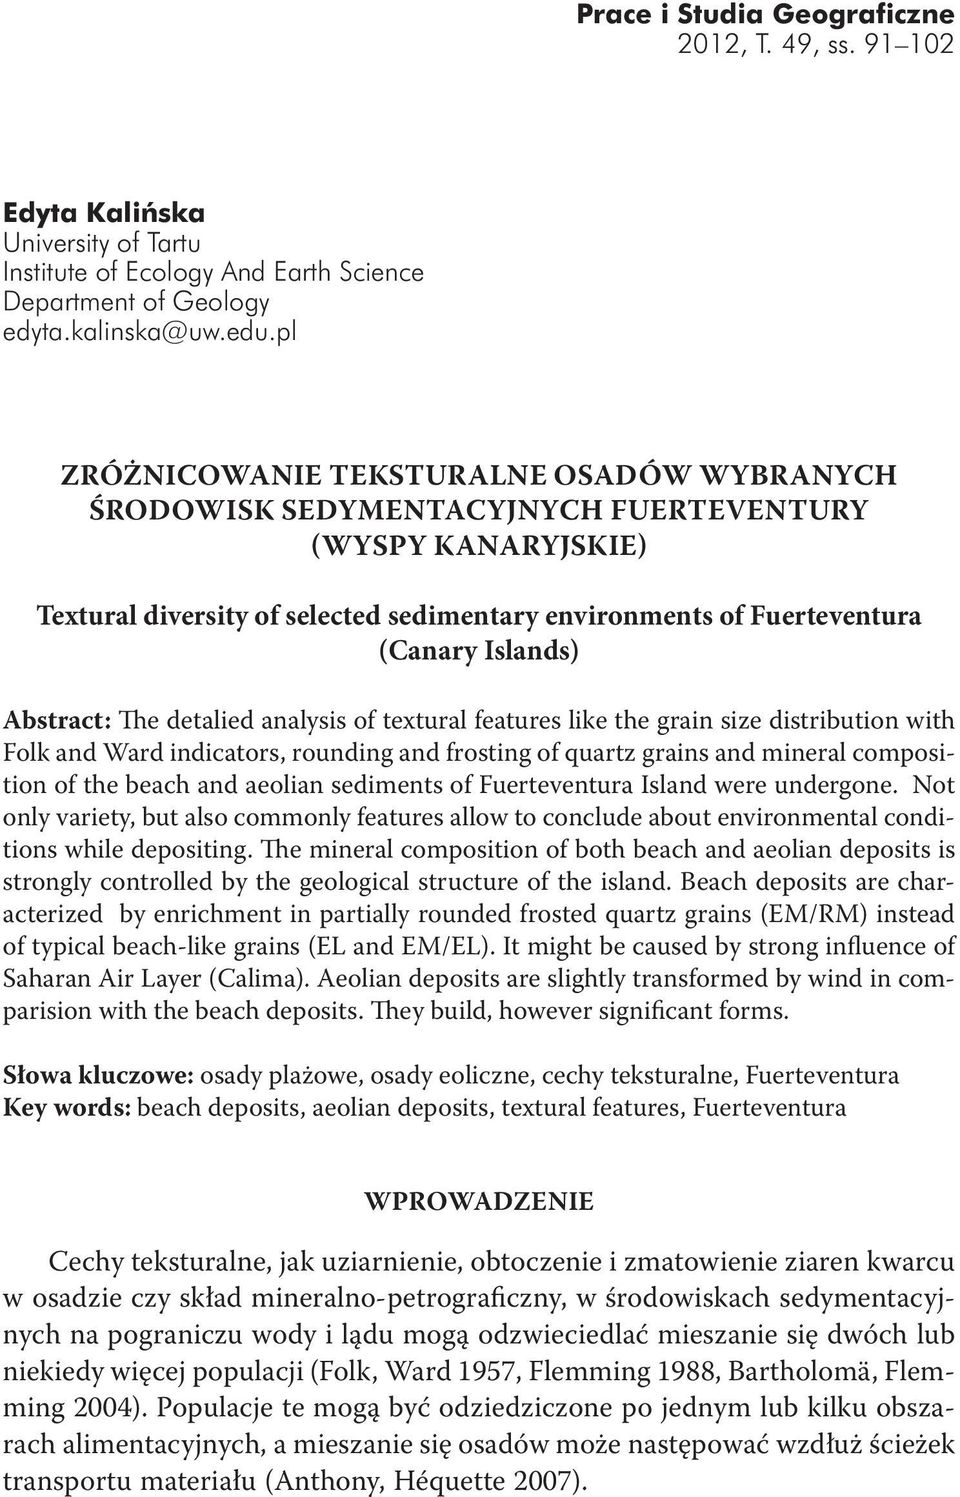 Abstract: The detalied analysis of textural features like the grain size distribution with Folk and Ward indicators, rounding and frosting of quartz grains and mineral composition of the beach and